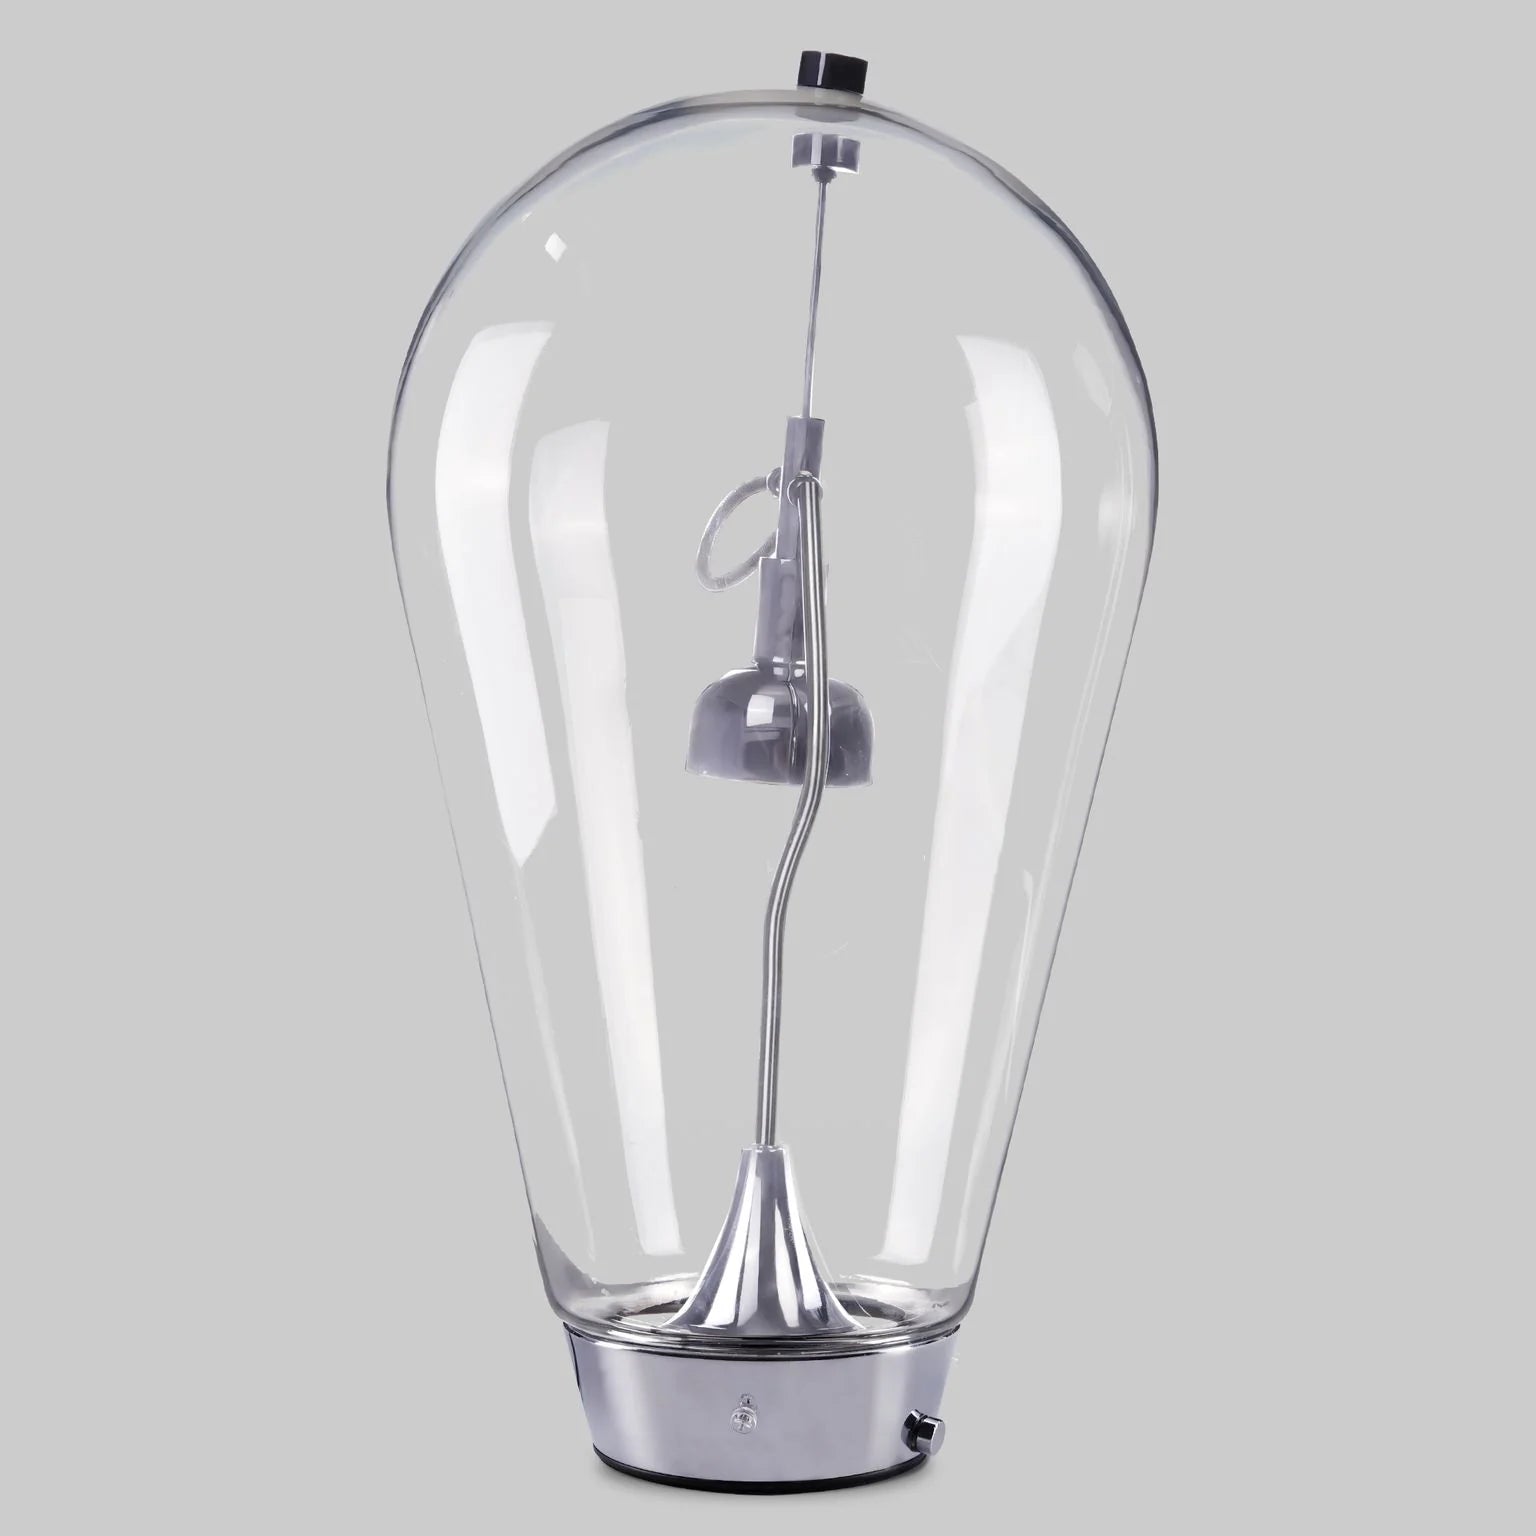 Functional Magnetic Bulb Night Lamp - LED Light with Dimmable Option